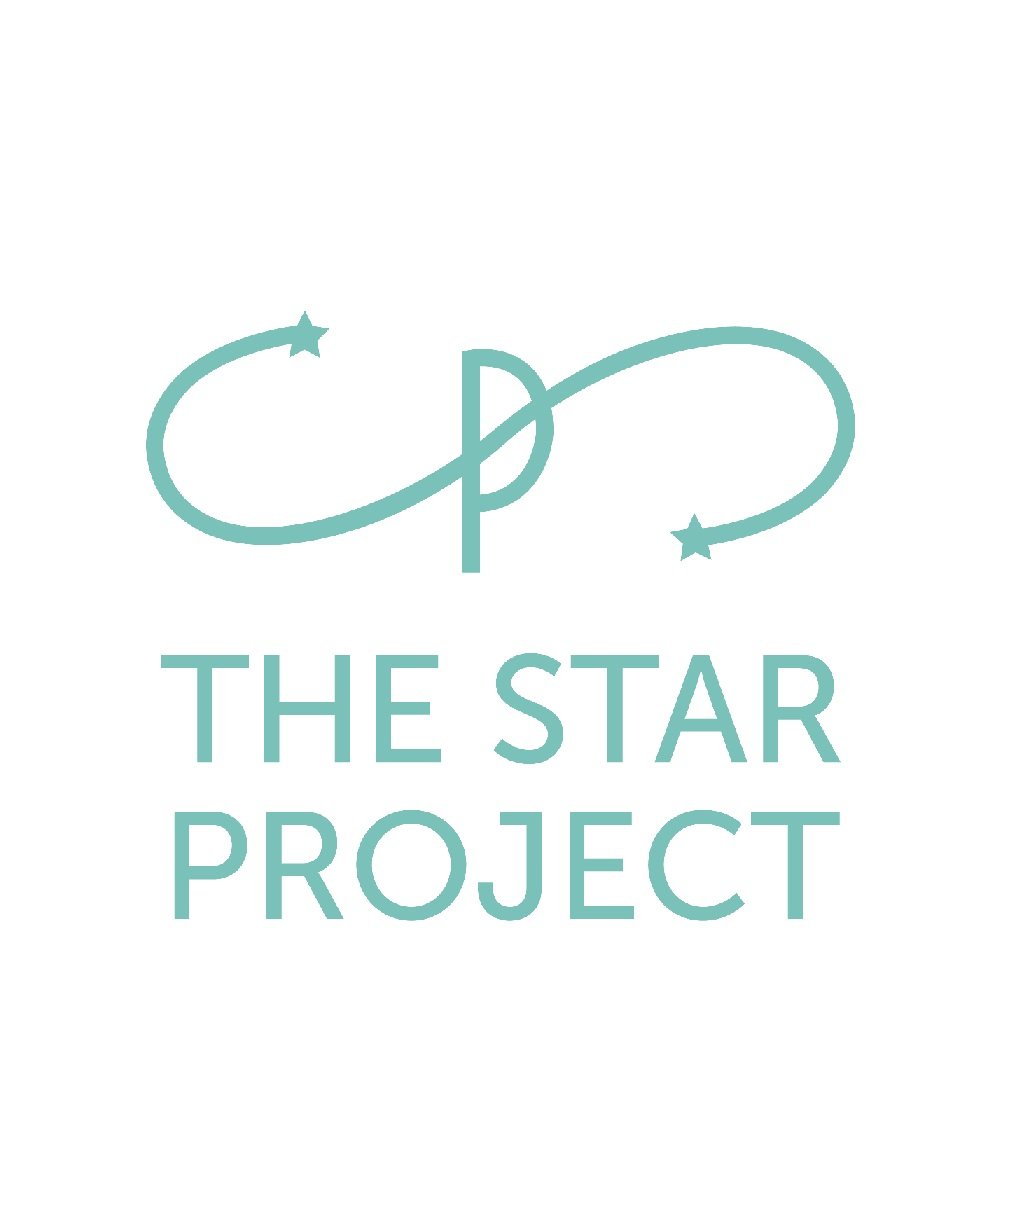 THE STAR PROJECT